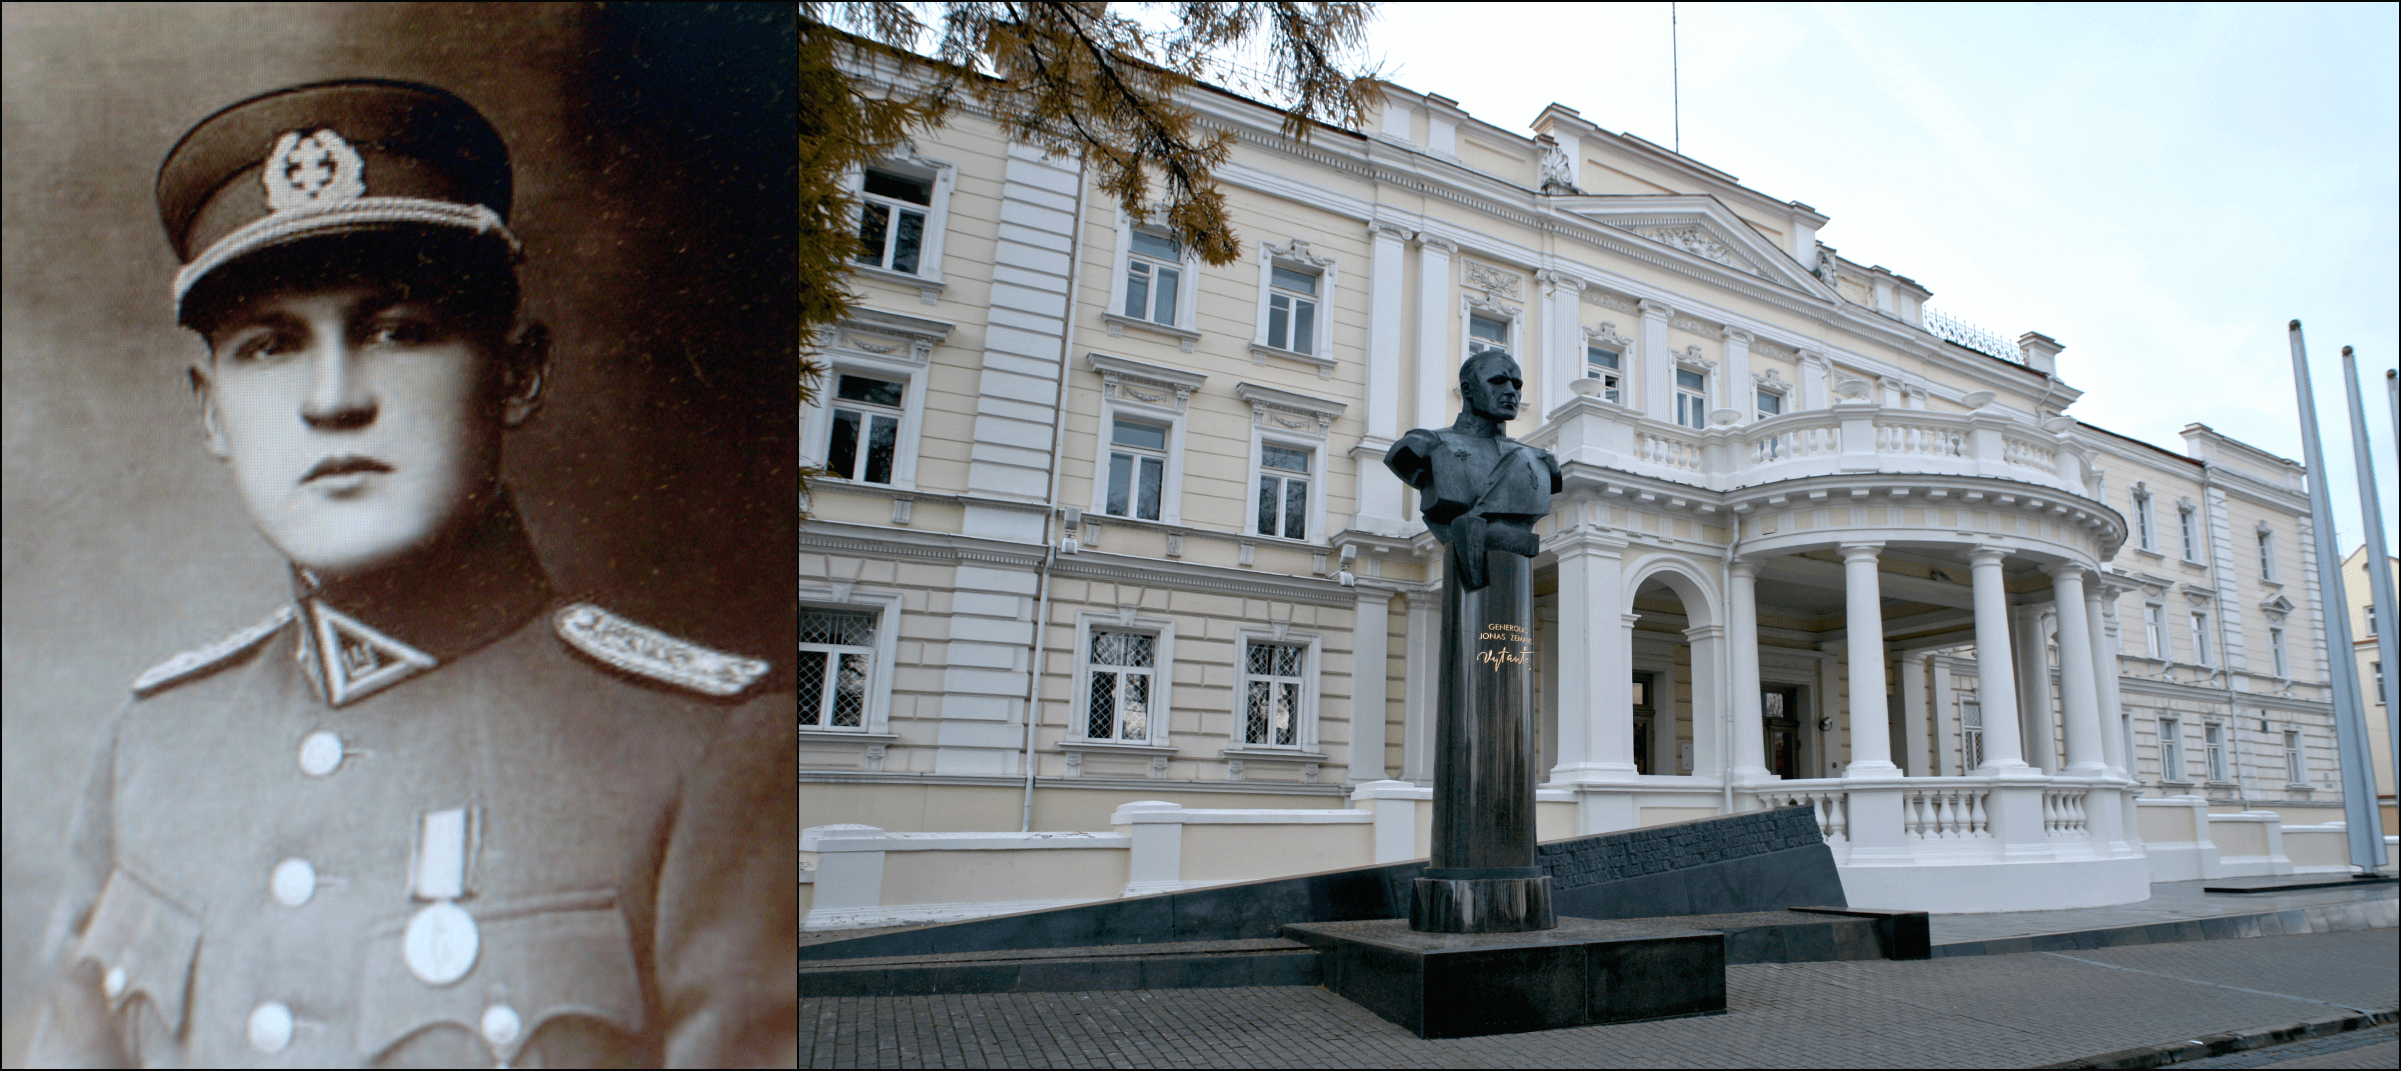 Left: Jonas Žemaitis-Vytautas (Wikimedia Commons). Right: Žemaitis-Vytautas bust outside the Ministry of National Defense of Lithuania, Vilnius (Wikimedia Commons). 